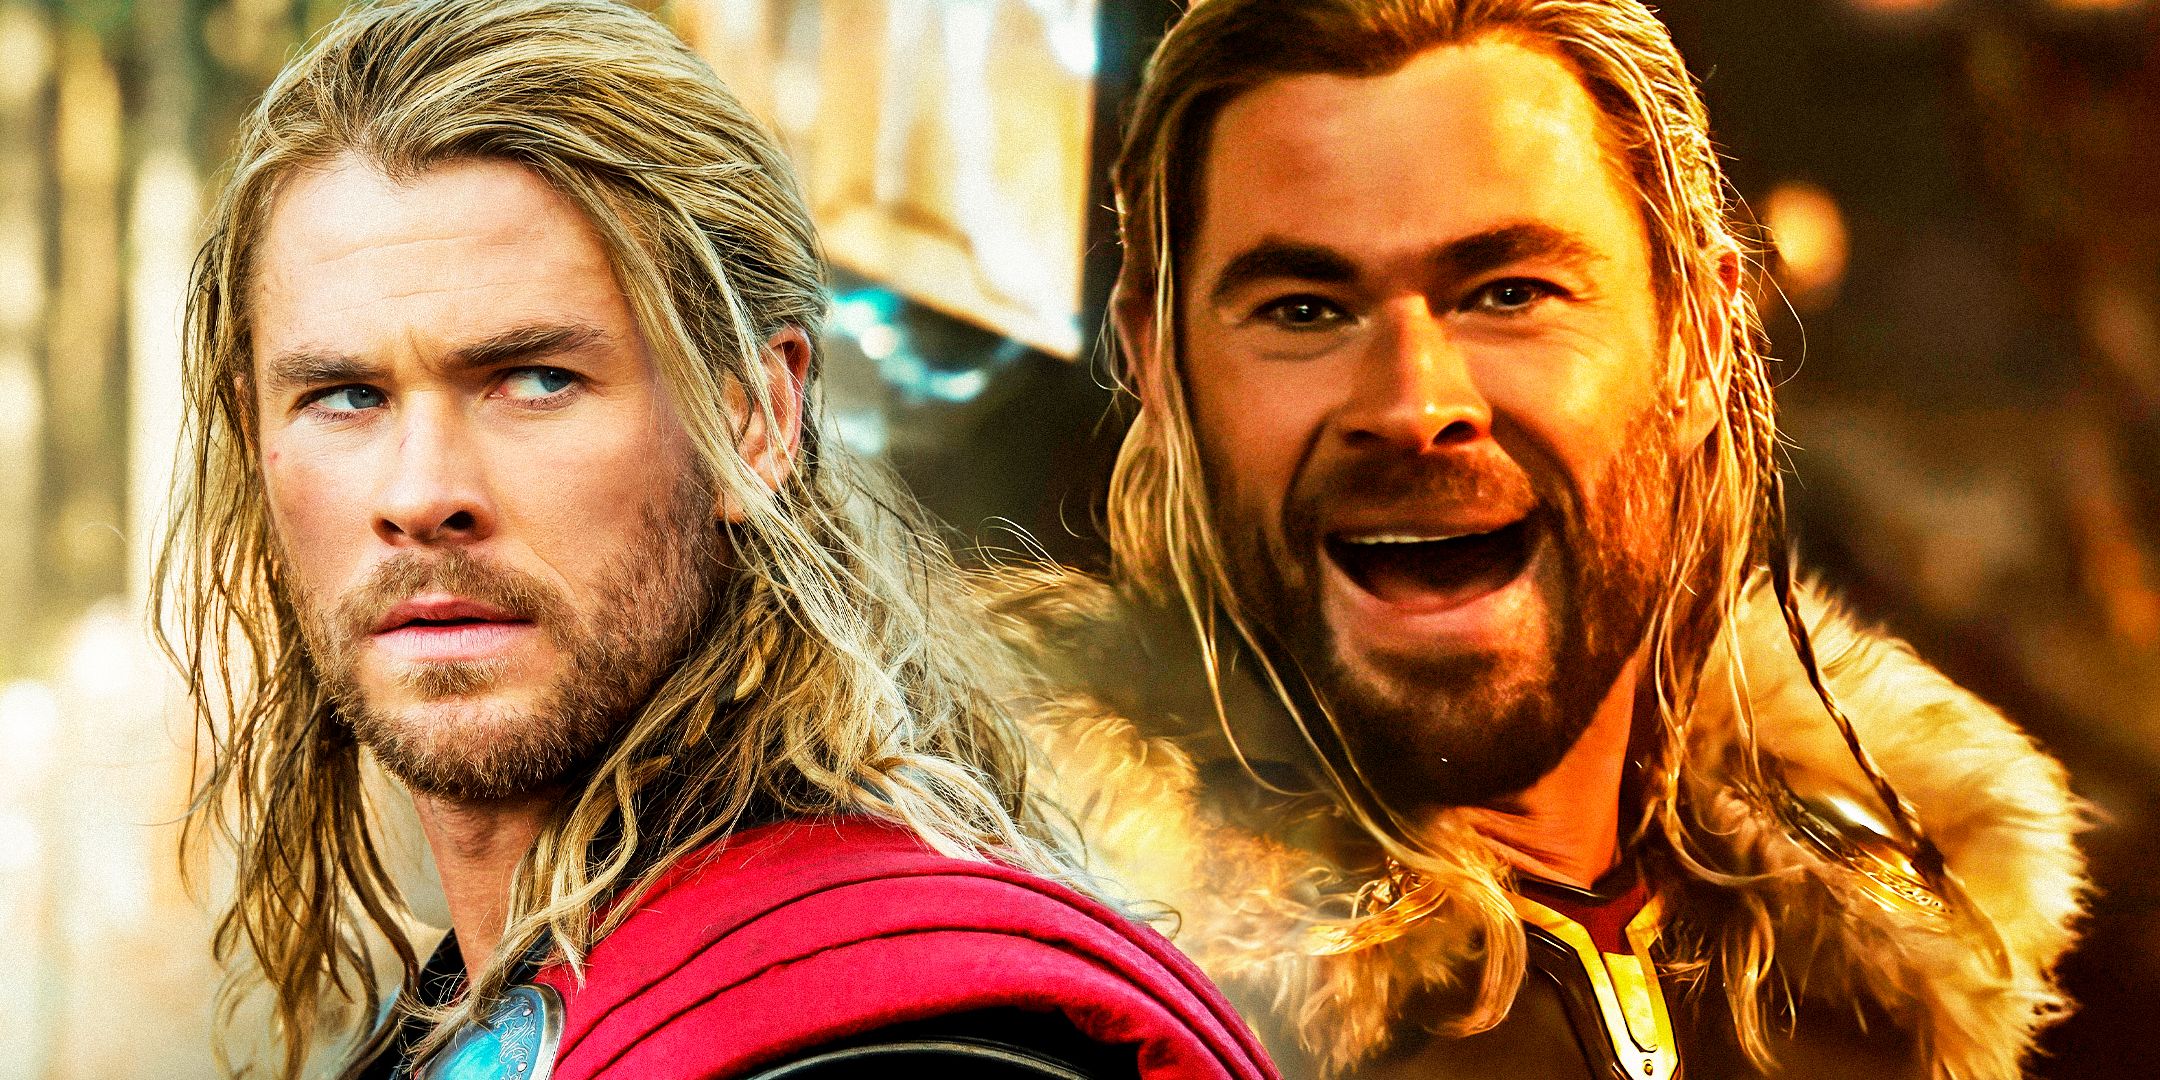 Chris Hemsworth as Thor looking concerned and as happy Thor in Love and Thunder